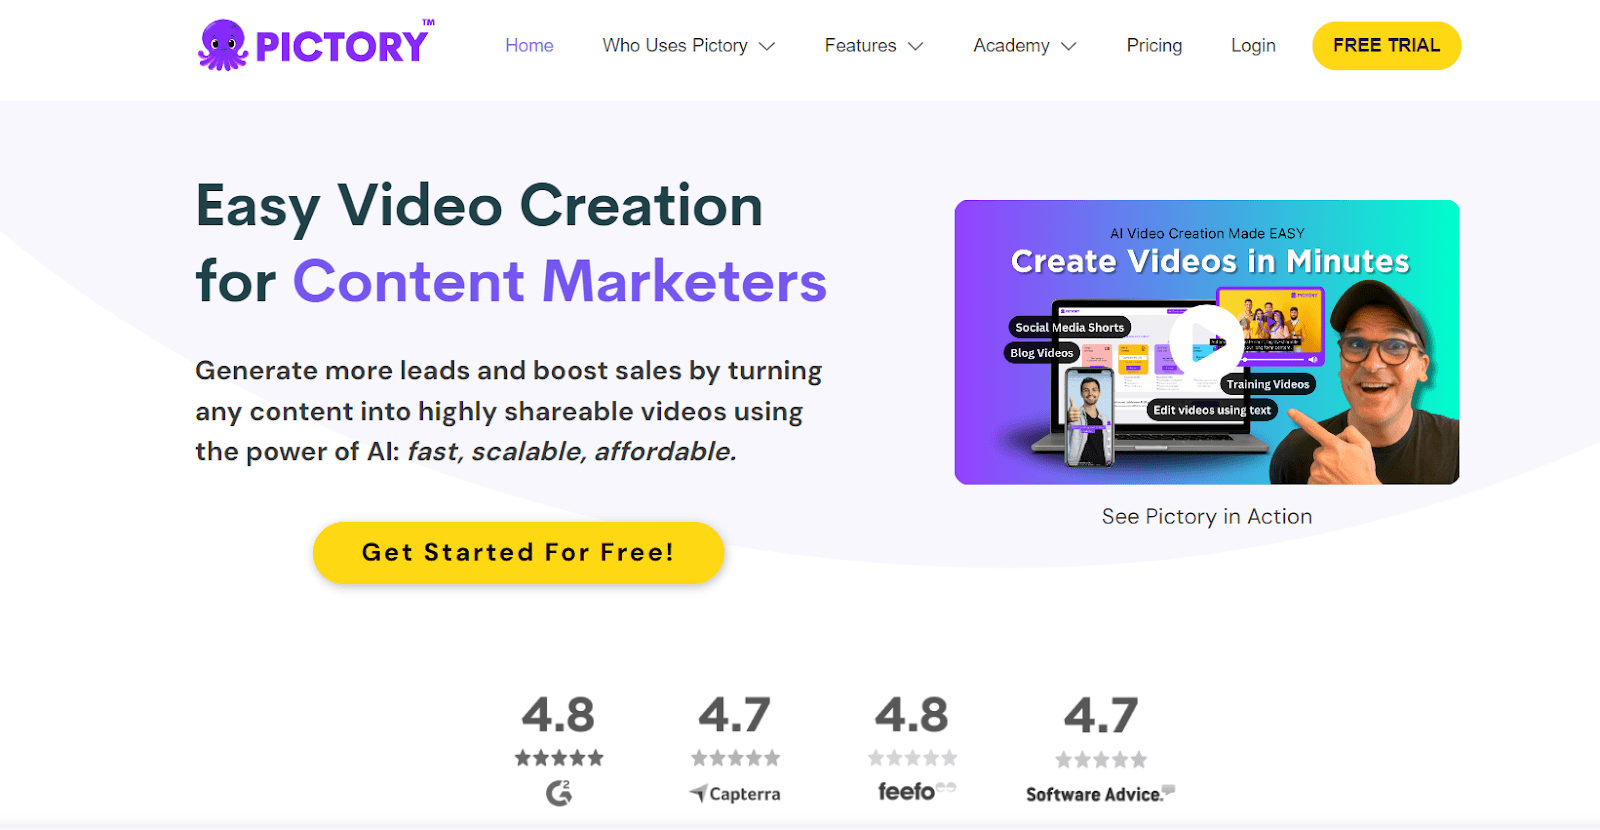 pictory website - easy video creation for content marketers